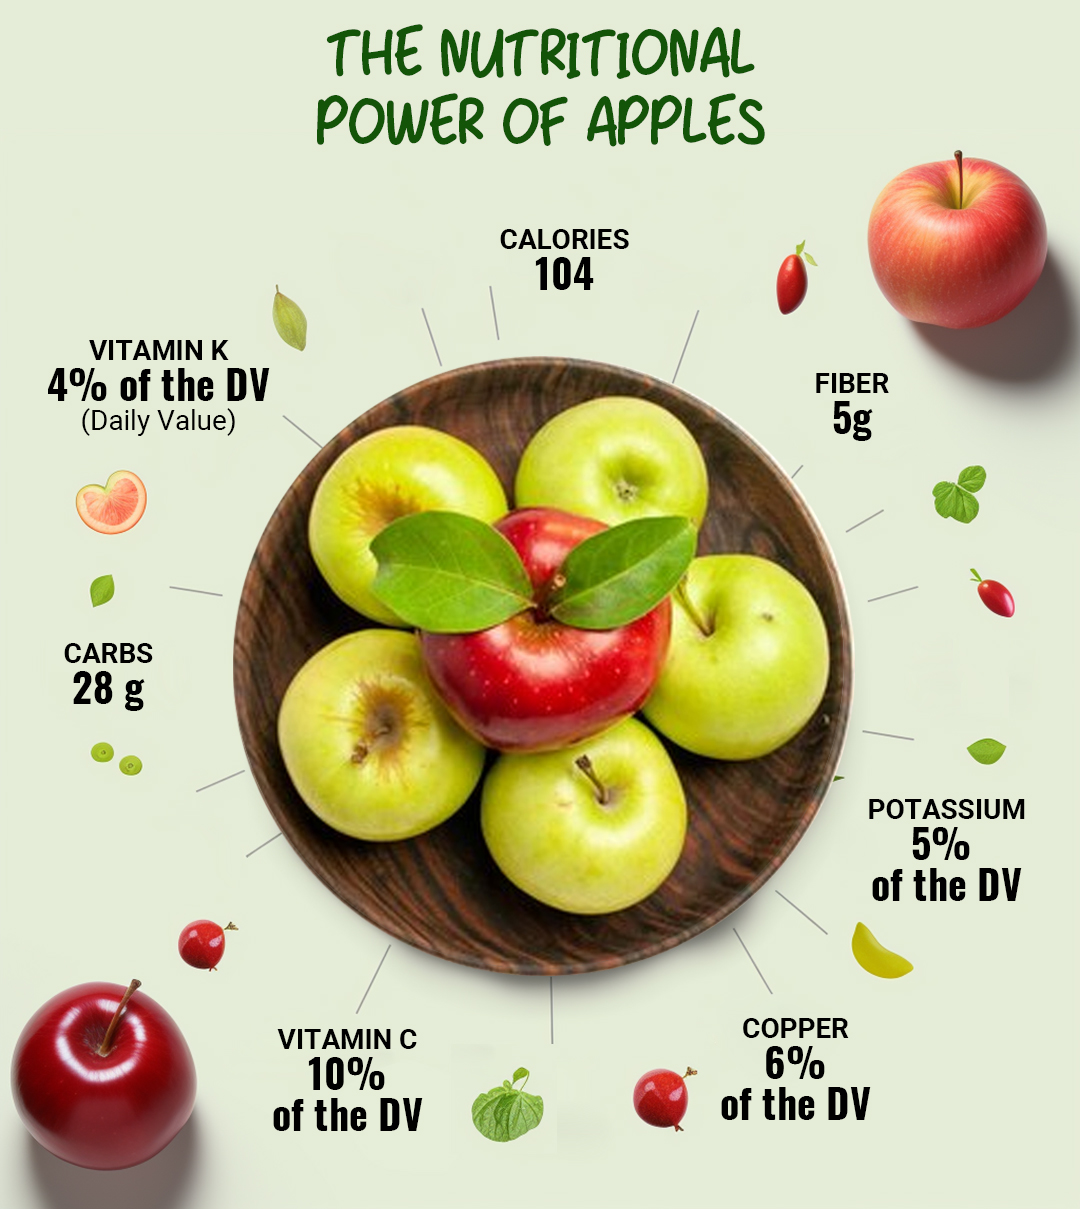 nutritional power of apples images